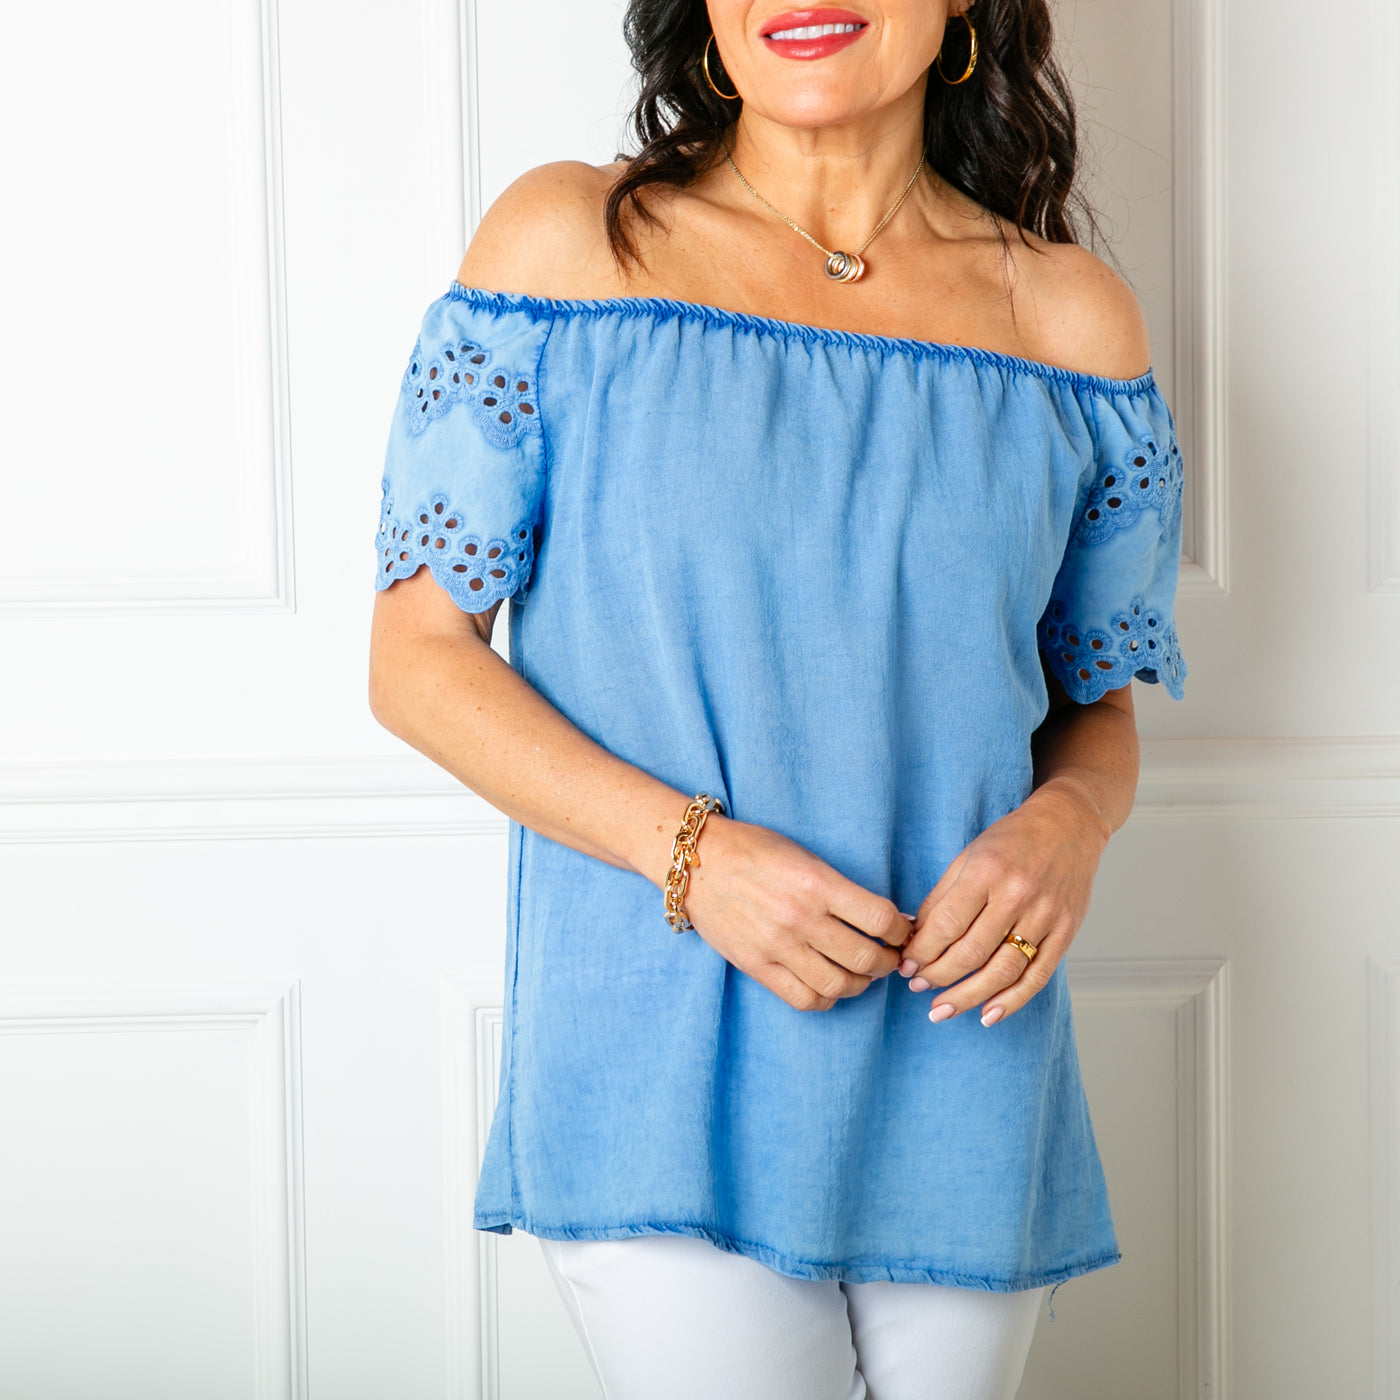 The denim blue Linen Blend Flutter Top with an elasticated bardot neckline so the top can be worn on or off the shoulder